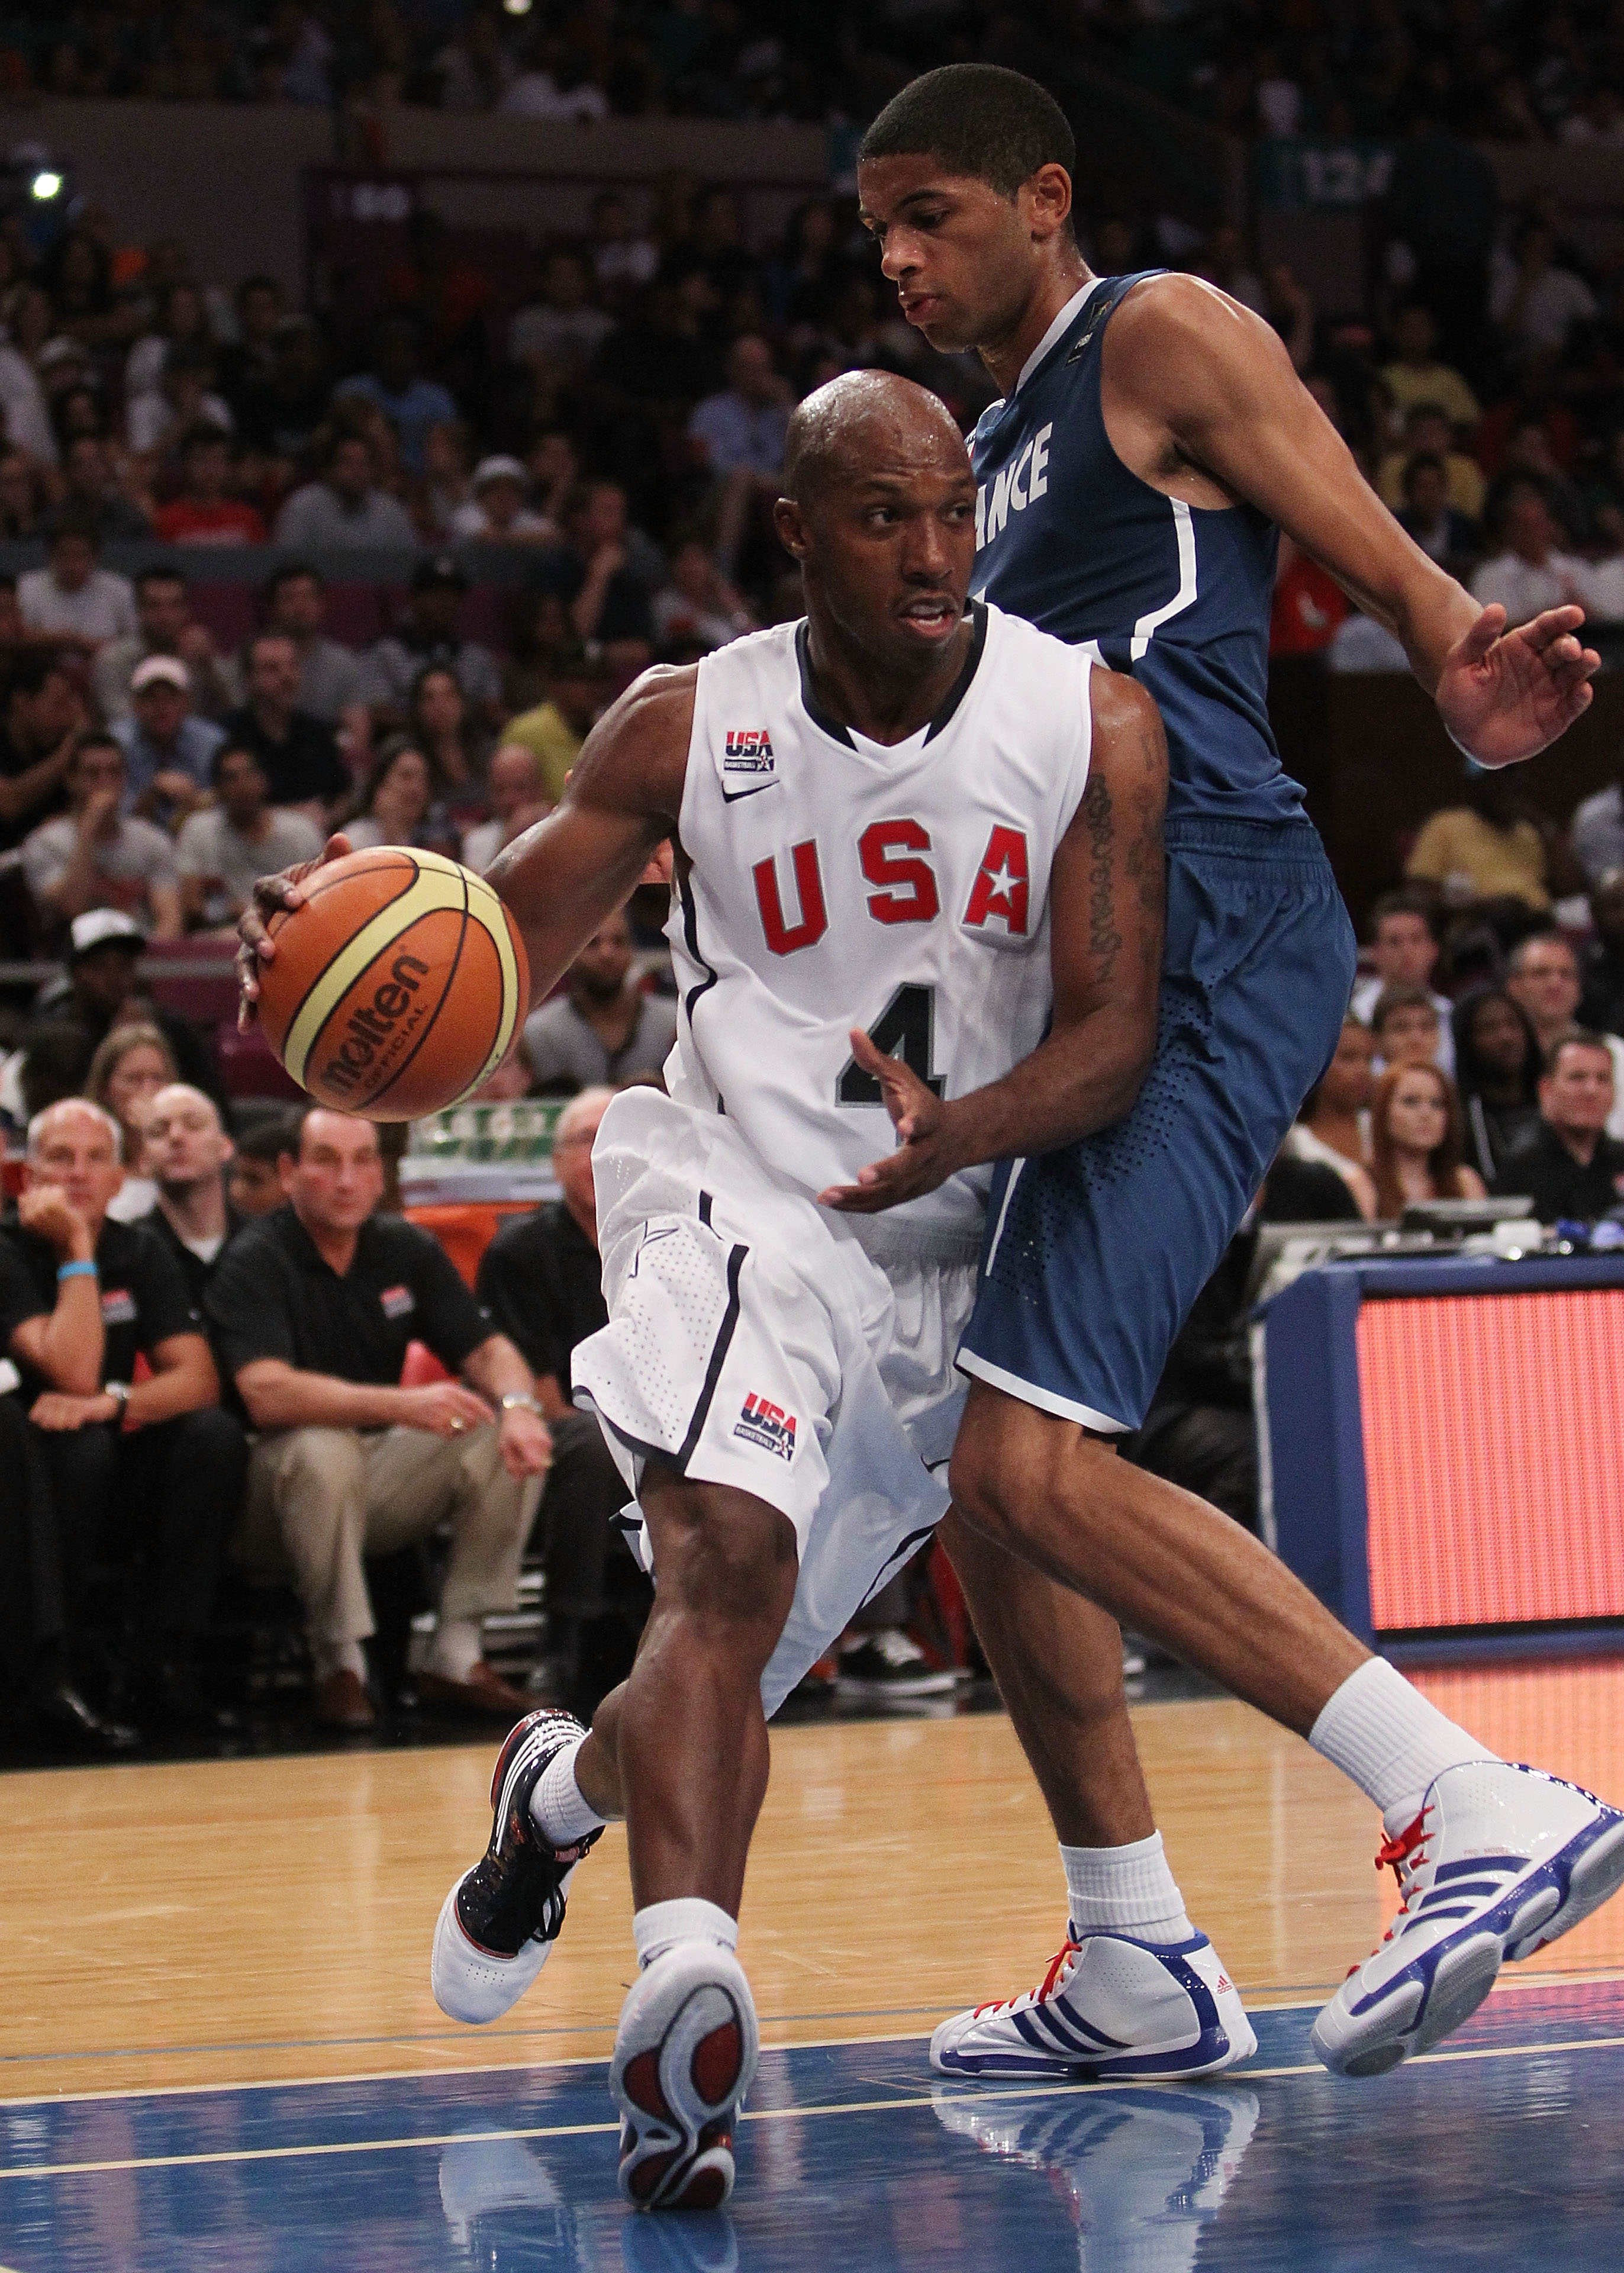 NEW YORK - AUGUST 15: Chauncey Billups #4 of the United States drives to the basket against France during their exhibition game as part of the World Basketball Festival at Madison Square Garden on August 15, 2010 in New York City.  (Photo by Nick Laham/Ge